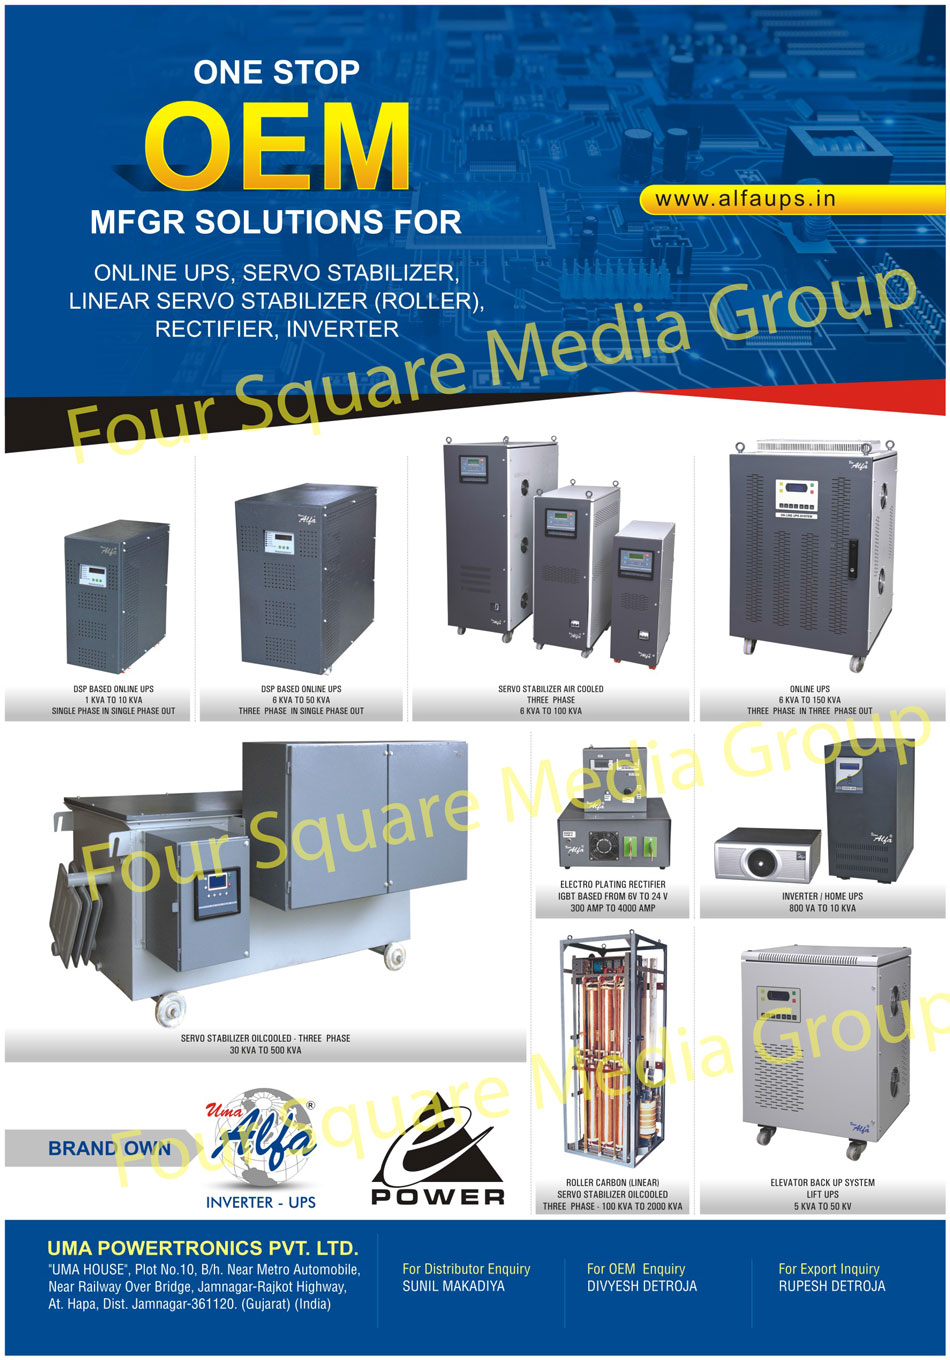 Online UPS, Servo Stabilizer, Battery Charger, Home UPS, Lift UPS, Lift Inverter, Oil Cooled Servo Stabilizer, Battery Charger, Sinewave Home Ups, Digital Home Ups, Air Cooled Servo Stabilizer, Linear Servo Stabilizer, Rectifier, Inverter, Elevator Back Up System Lift Ups, Electro Plating Rectifiers